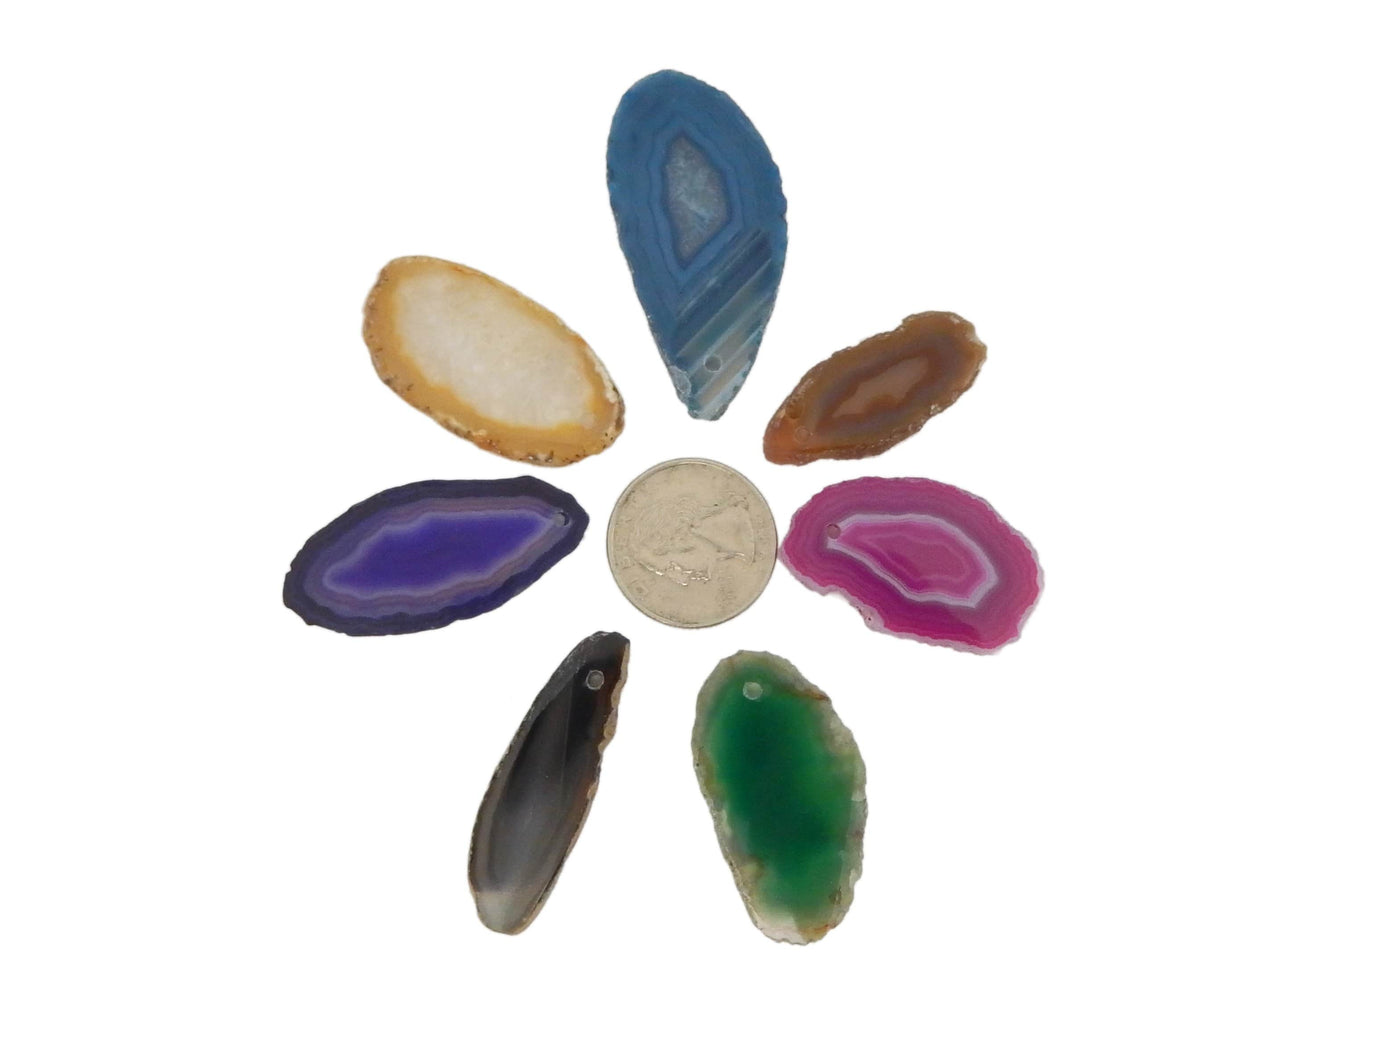 7 Different Color Agate Slices Drilled Around a Quarter on White Background.